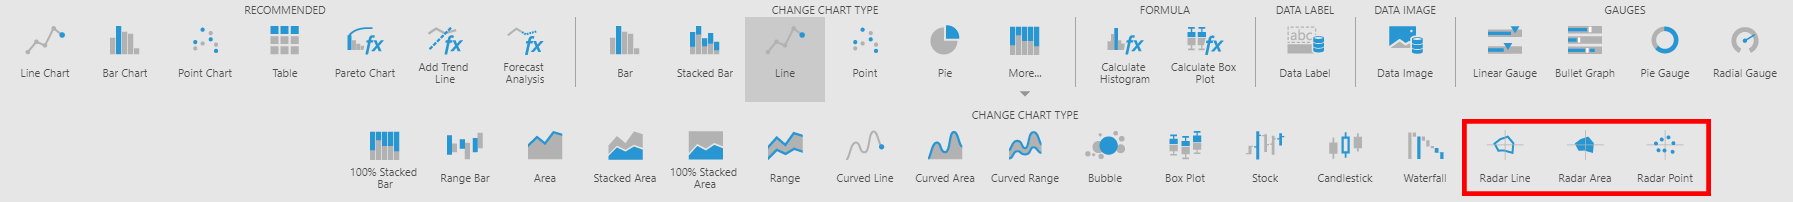 What Type Of Chart Is This